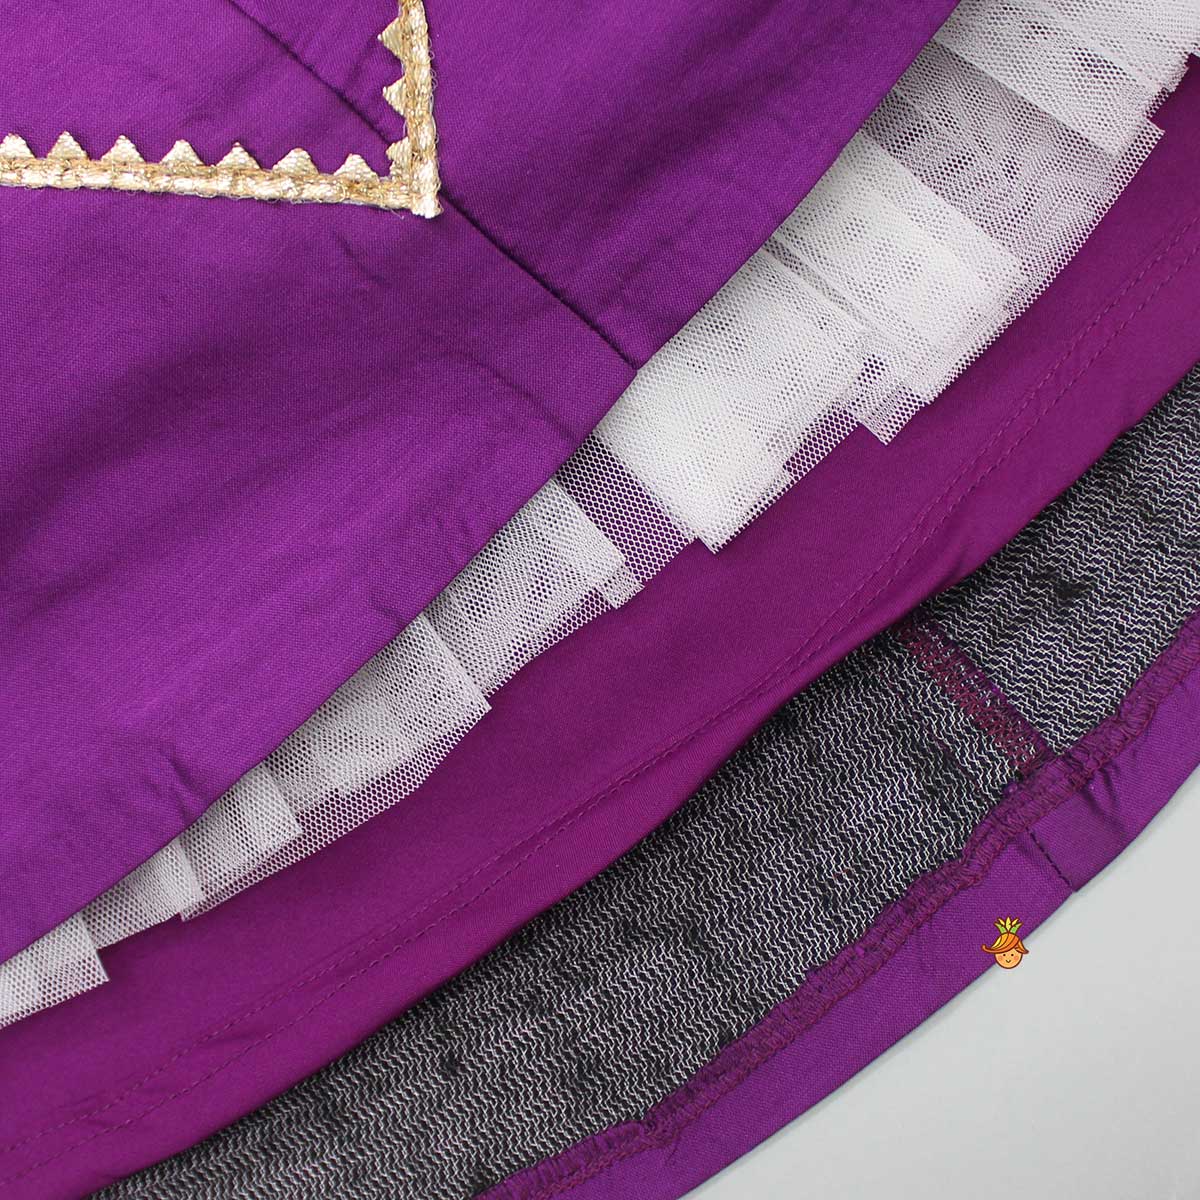 Purple Embroidered Top And Lehenga With Matching Net Dupatta